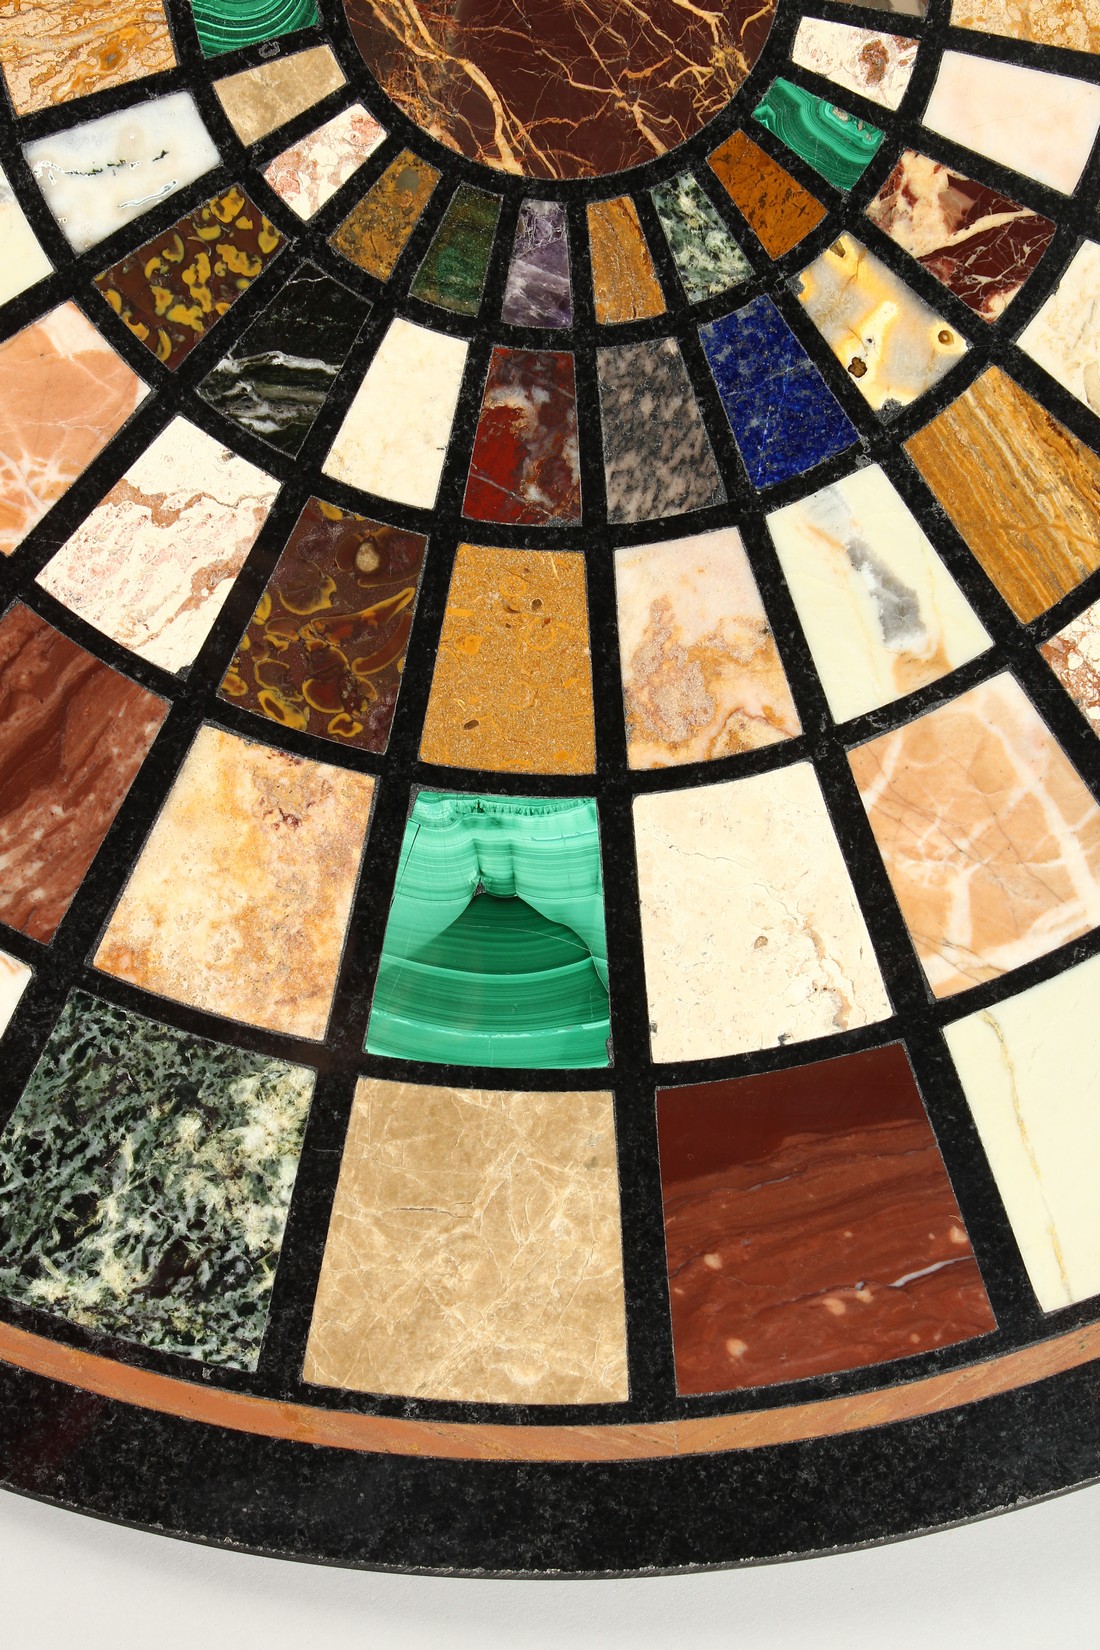 A VERY GOOD SPECIMEN MARBLE CIRCULAR TABLE TOP, with radiating bands and sections of various marbles - Image 7 of 11